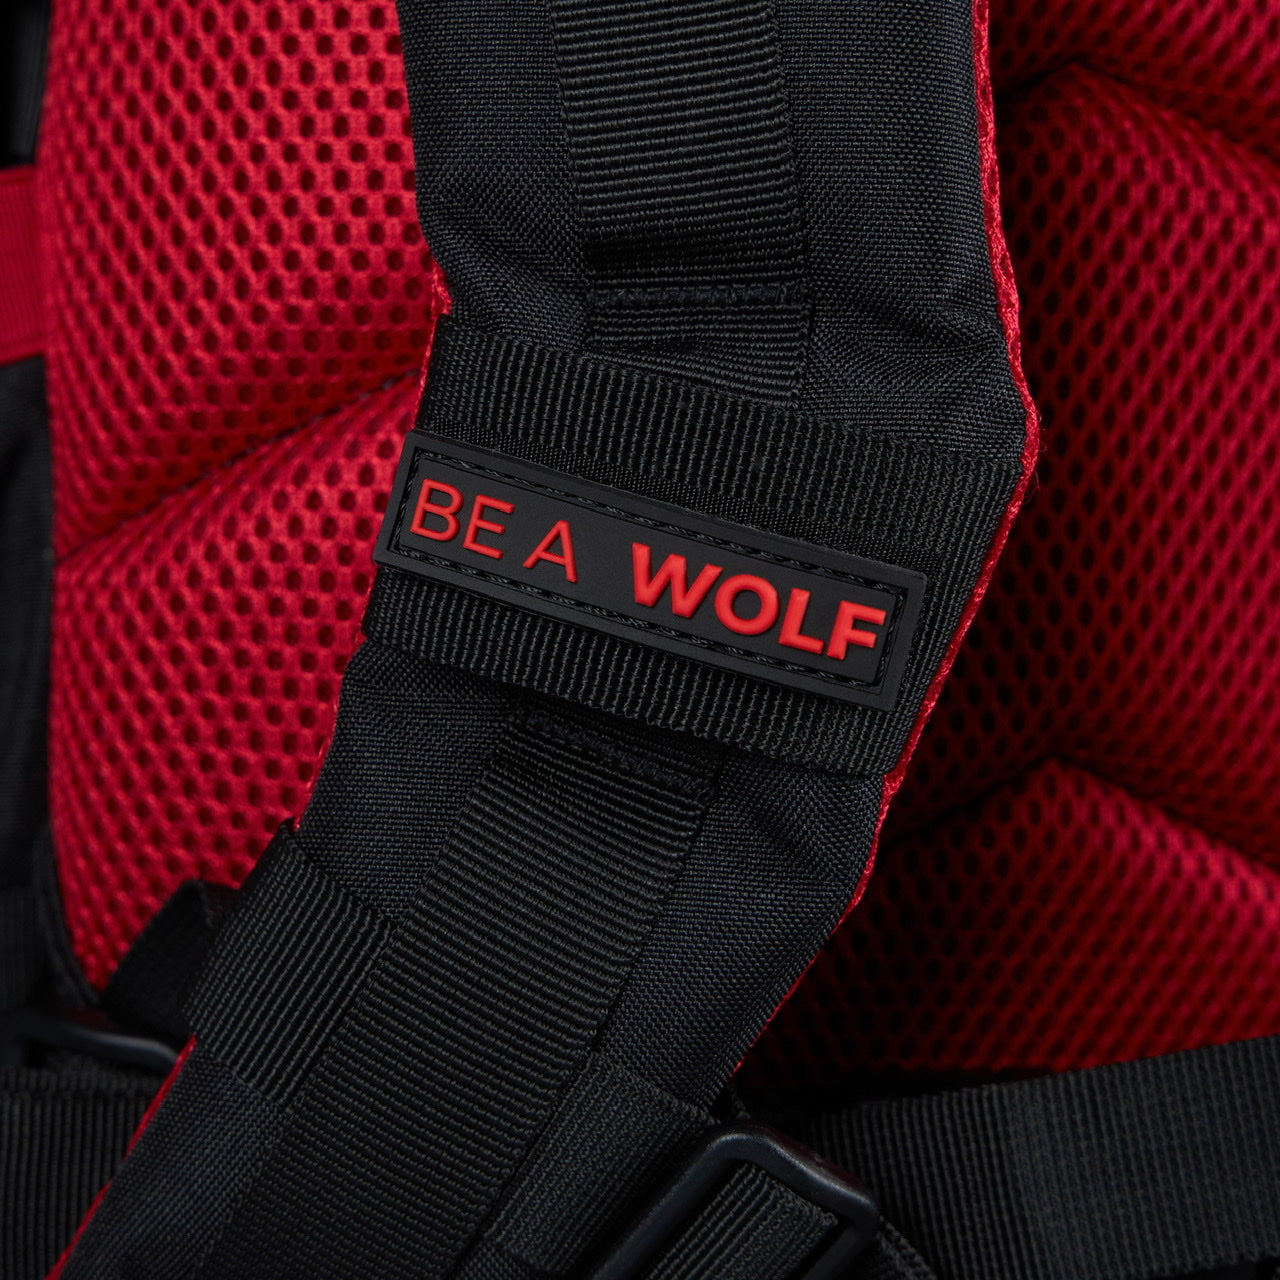 35L Backpack Red Wolf